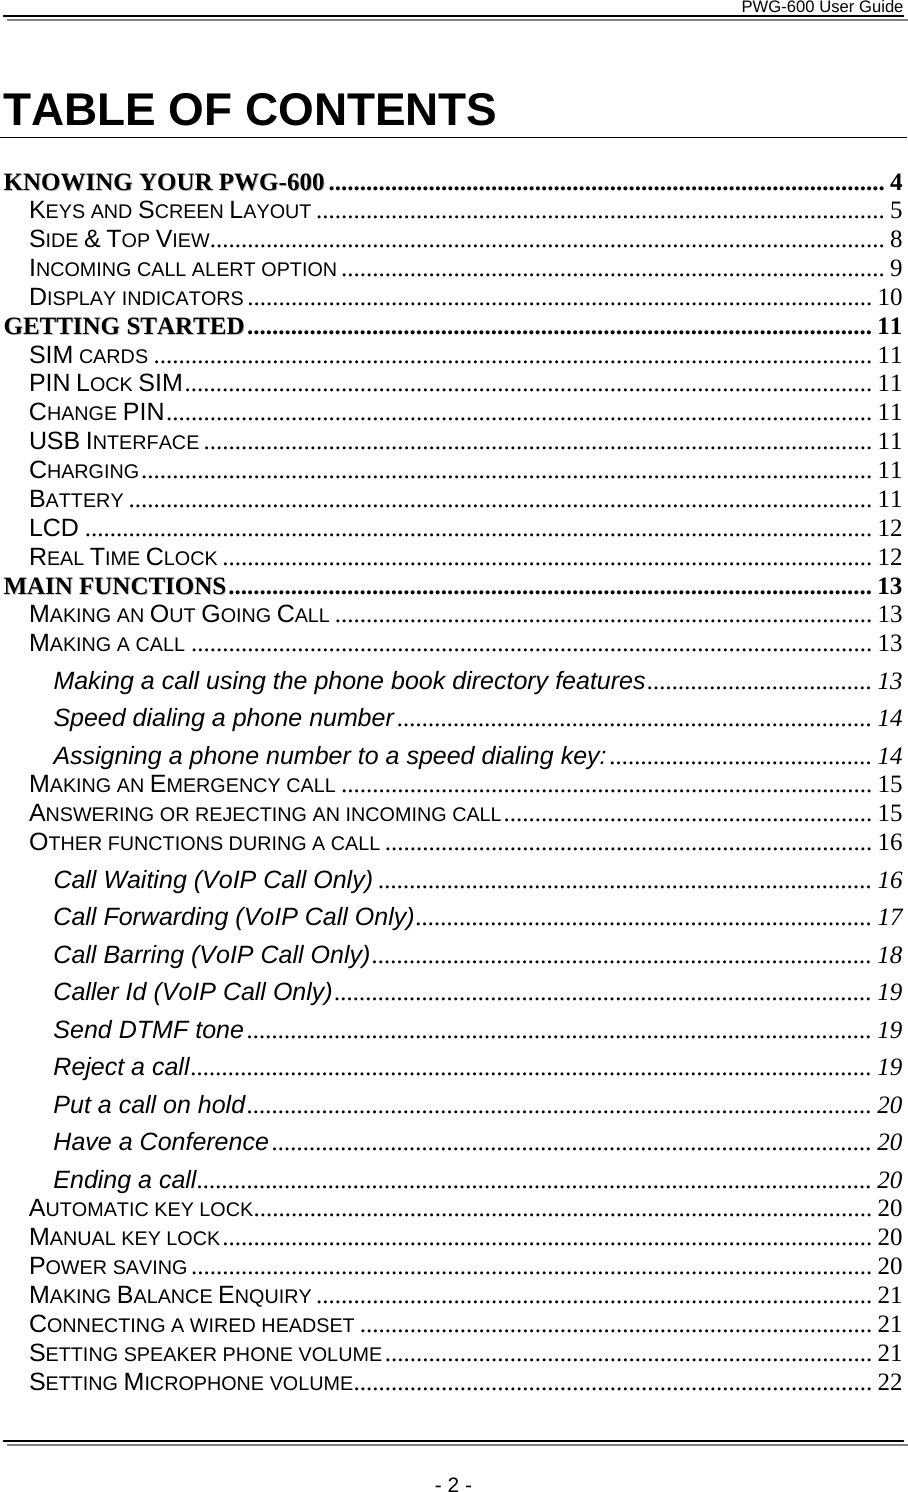      PWG-600 User Guide    - 2 -  TABLE OF CONTENTS  KKNNOOWWIINNGG  YYOOUURR  PPWWGG--660000......................................................................................... 4 KEYS AND SCREEN LAYOUT ........................................................................................... 5 SIDE &amp; TOP VIEW............................................................................................................ 8 INCOMING CALL ALERT OPTION ....................................................................................... 9 DISPLAY INDICATORS.................................................................................................... 10 GGEETTTTIINNGG  SSTTAARRTTEEDD.................................................................................................... 11 SIM CARDS ................................................................................................................... 11 PIN LOCK SIM.............................................................................................................. 11 CHANGE PIN................................................................................................................. 11 USB INTERFACE ........................................................................................................... 11 CHARGING..................................................................................................................... 11 BATTERY ....................................................................................................................... 11 LCD .............................................................................................................................. 12 REAL TIME CLOCK ........................................................................................................ 12 MMAAIINN  FFUUNNCCTTIIOONNSS....................................................................................................... 13 MAKING AN OUT GOING CALL ...................................................................................... 13 MAKING A CALL ............................................................................................................. 13 Making a call using the phone book directory features.................................... 13 Speed dialing a phone number............................................................................ 14 Assigning a phone number to a speed dialing key:.......................................... 14 MAKING AN EMERGENCY CALL ..................................................................................... 15 ANSWERING OR REJECTING AN INCOMING CALL........................................................... 15 OTHER FUNCTIONS DURING A CALL .............................................................................. 16 Call Waiting (VoIP Call Only) ............................................................................... 16 Call Forwarding (VoIP Call Only)......................................................................... 17 Call Barring (VoIP Call Only)................................................................................ 18 Caller Id (VoIP Call Only)...................................................................................... 19 Send DTMF tone.................................................................................................... 19 Reject a call............................................................................................................. 19 Put a call on hold.................................................................................................... 20 Have a Conference................................................................................................ 20 Ending a call............................................................................................................ 20 AUTOMATIC KEY LOCK................................................................................................... 20 MANUAL KEY LOCK........................................................................................................ 20 POWER SAVING ............................................................................................................. 20 MAKING BALANCE ENQUIRY ......................................................................................... 21 CONNECTING A WIRED HEADSET .................................................................................. 21 SETTING SPEAKER PHONE VOLUME.............................................................................. 21 SETTING MICROPHONE VOLUME................................................................................... 22 